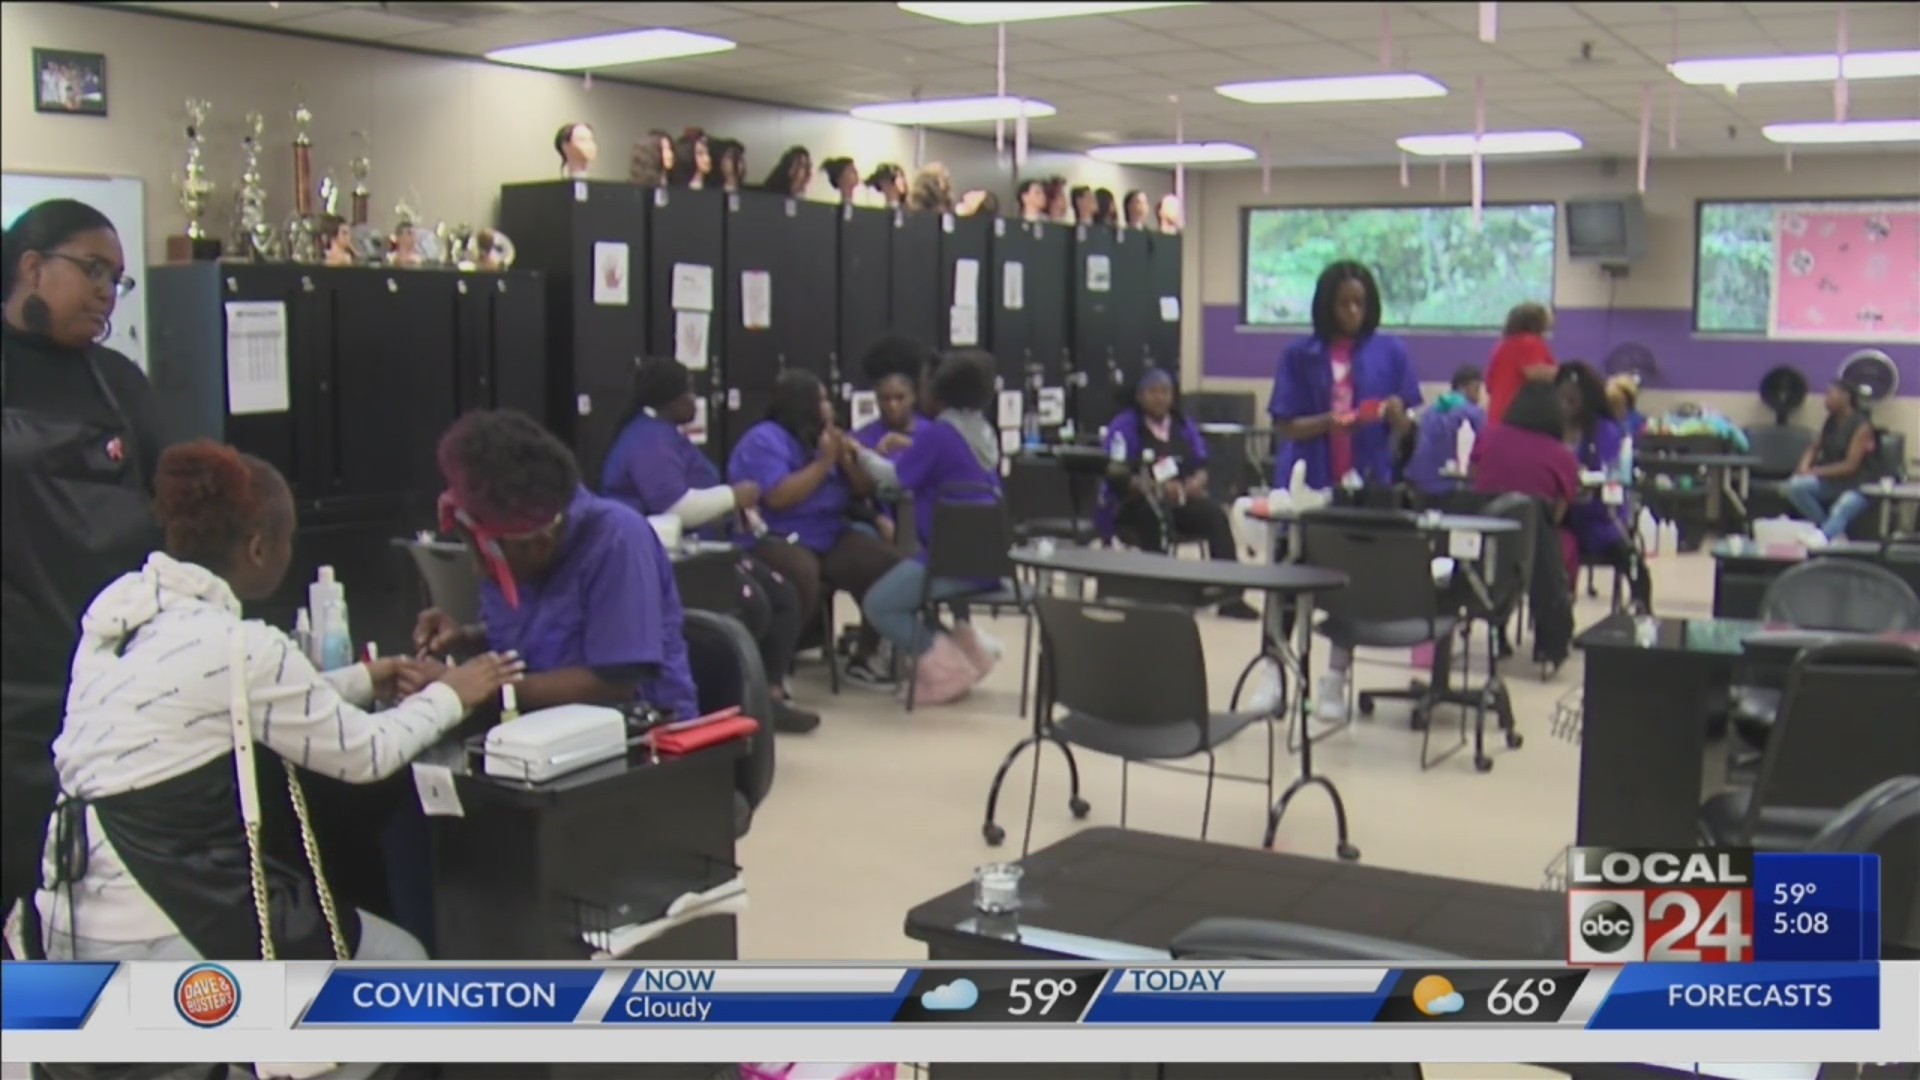 Memphis school gives cancer patients and survivors free hairstyles, facials, and manicures